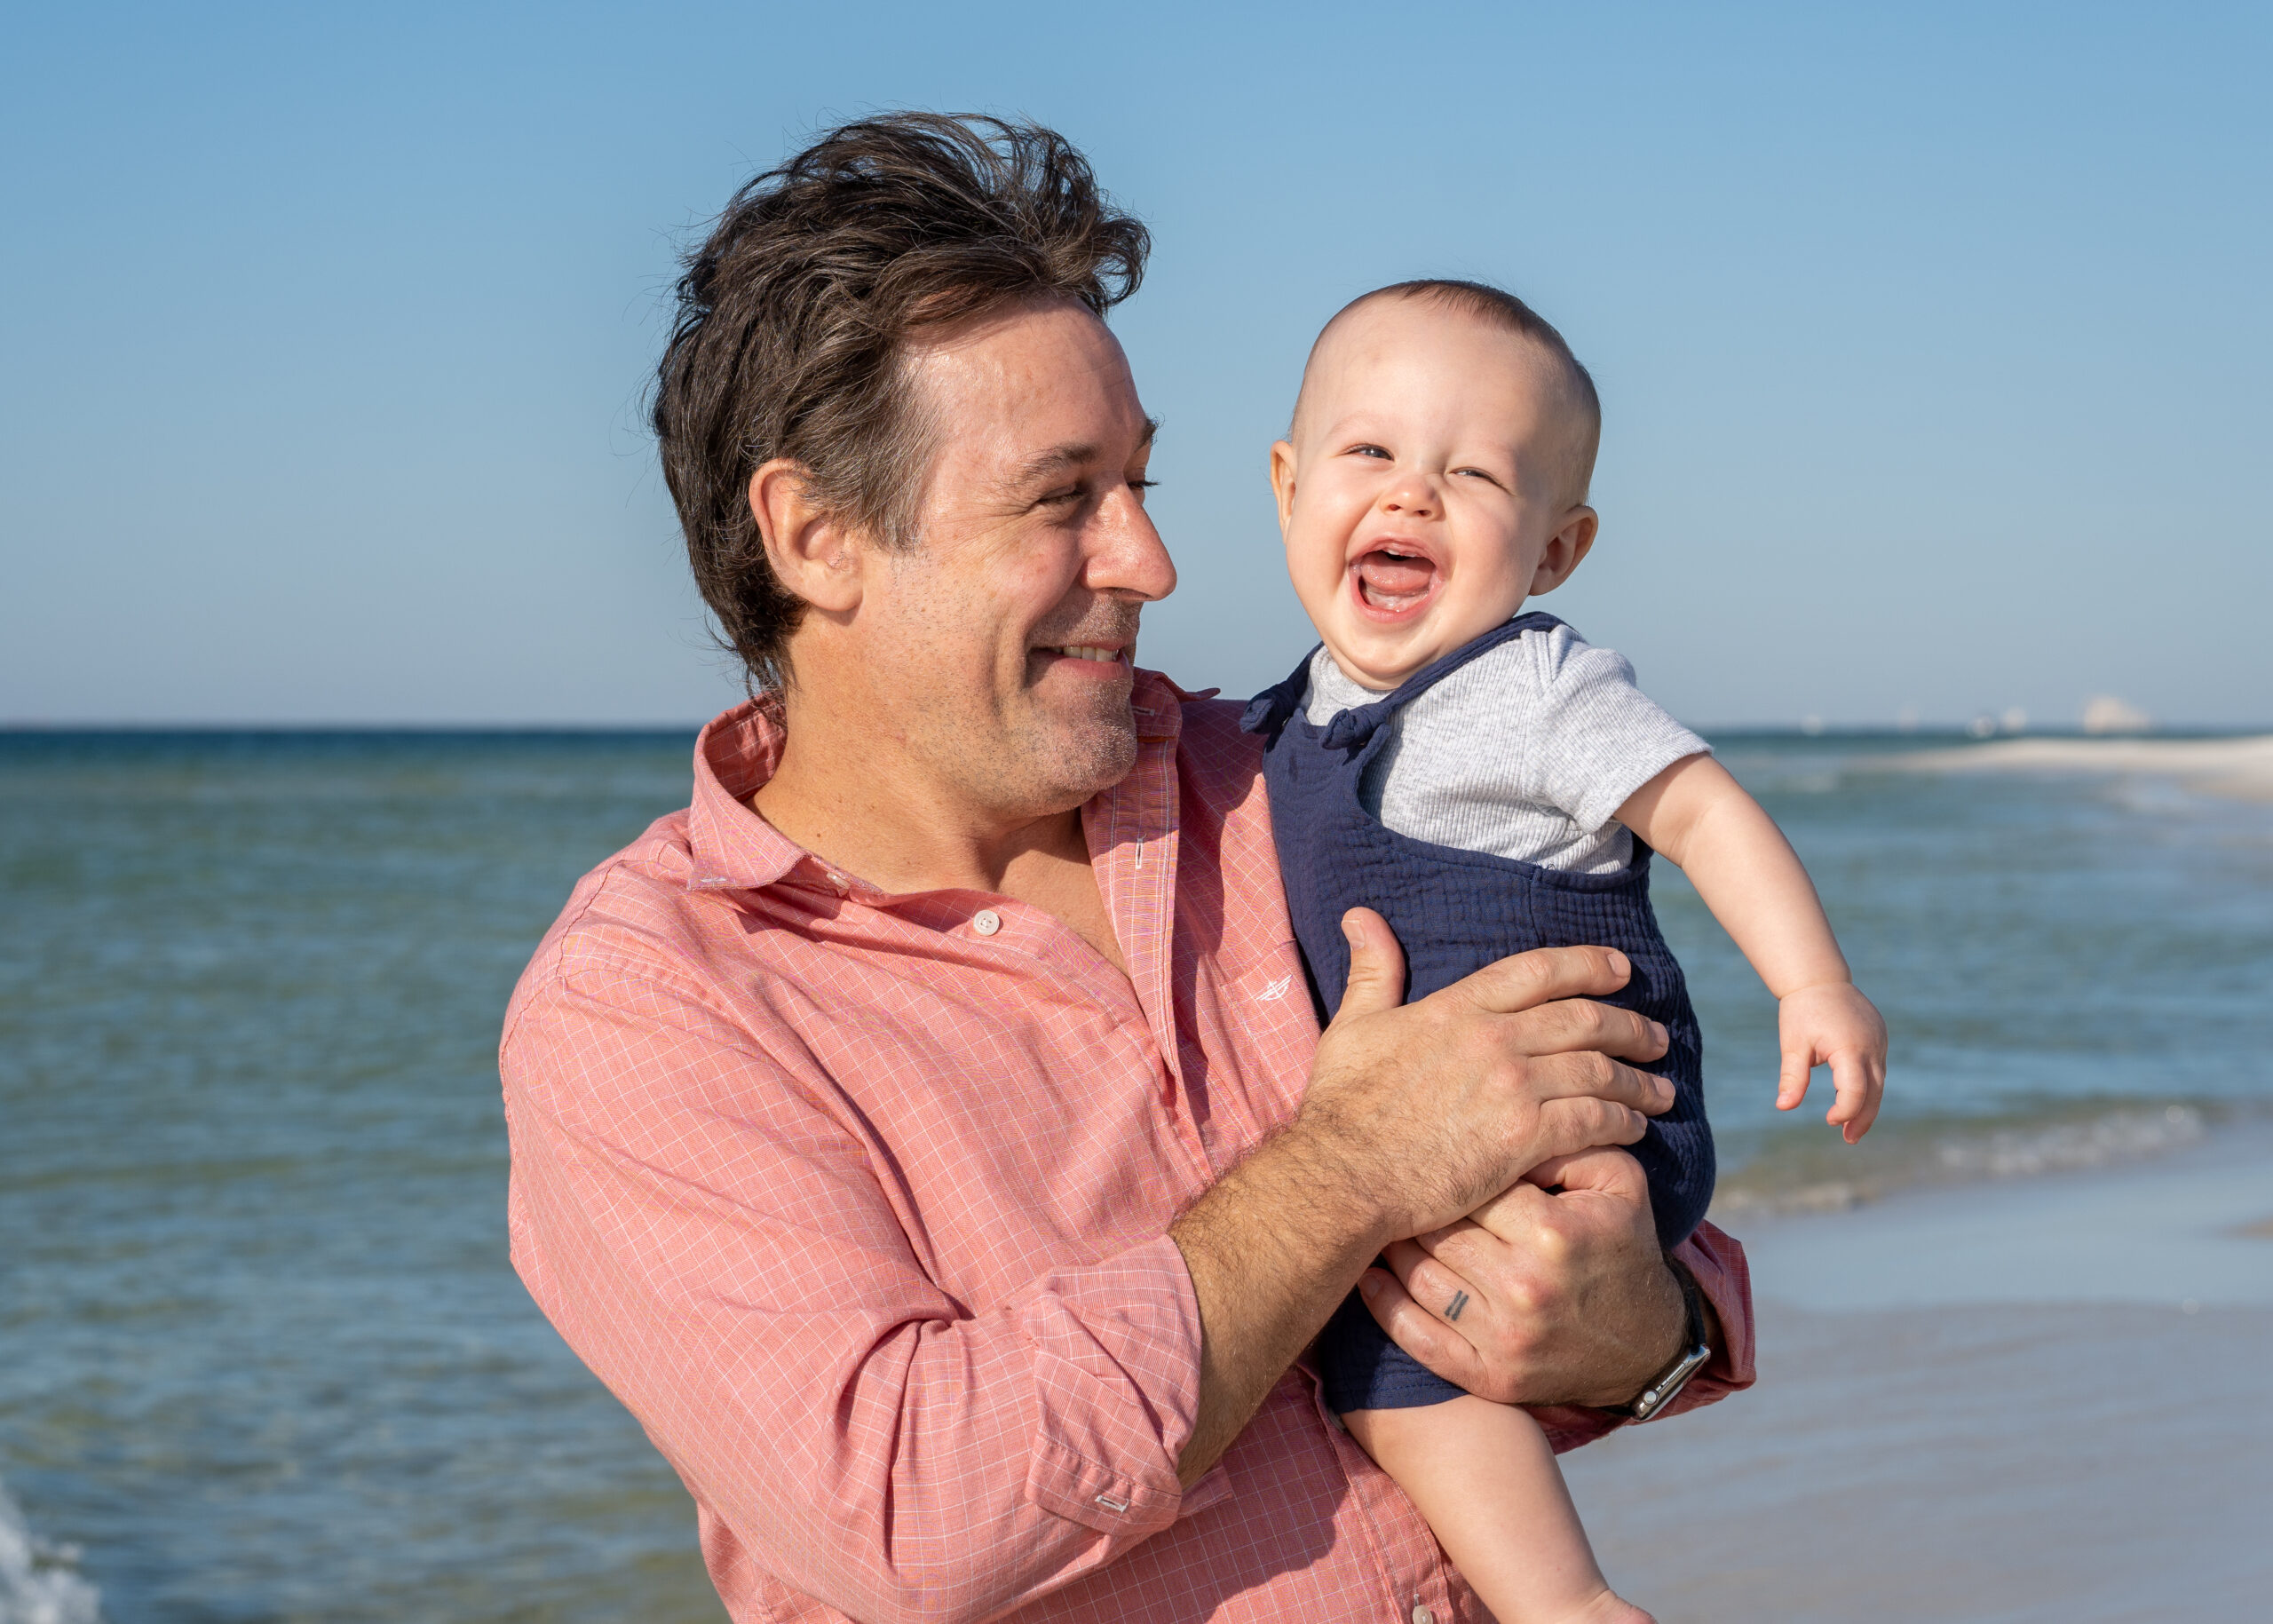 A man holding a baby on the beach